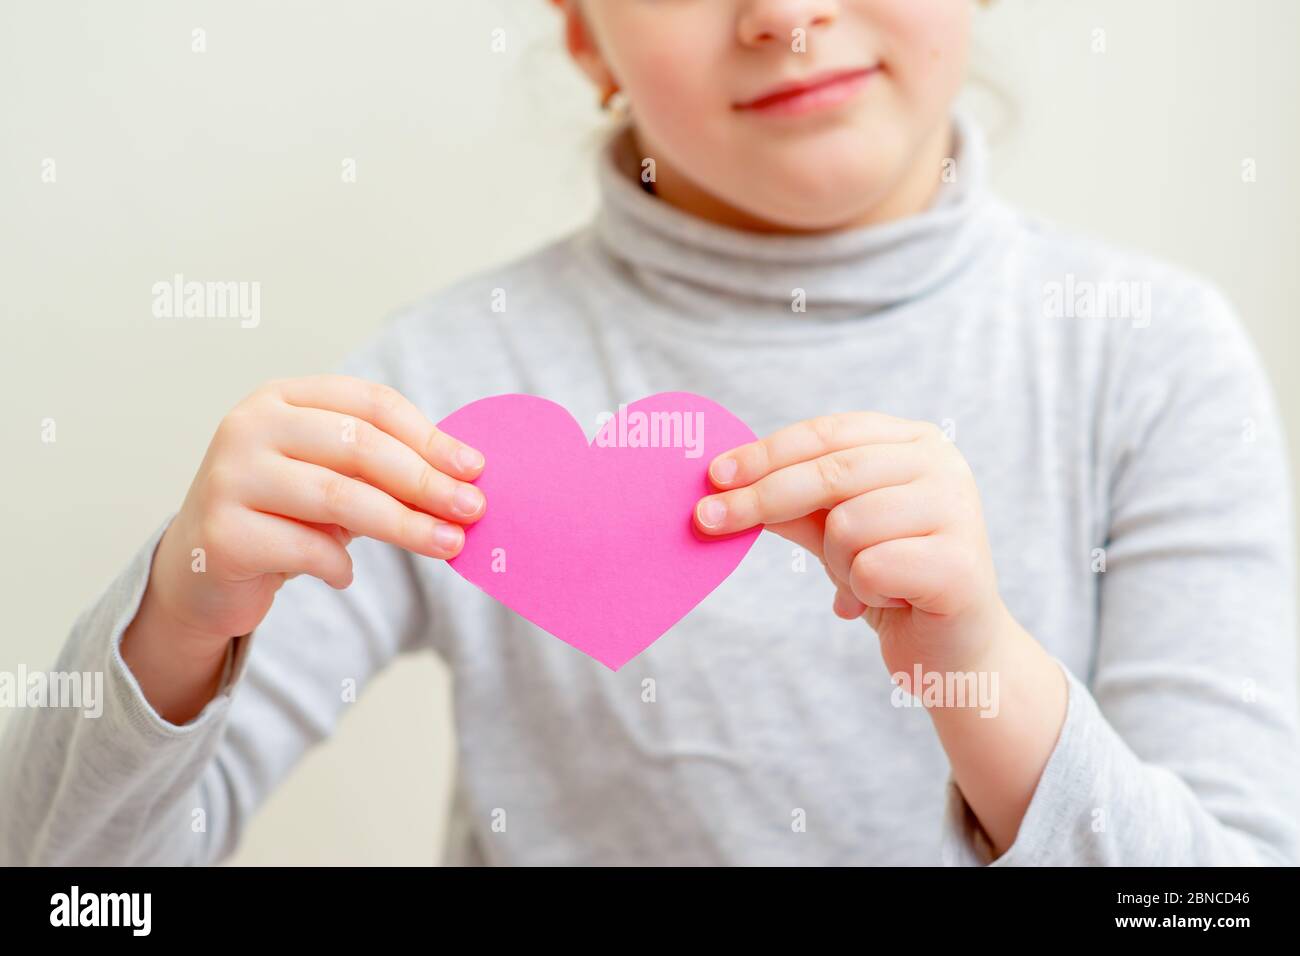 Child is holding pink paper heart standing on white background. Child love concept. Stock Photo